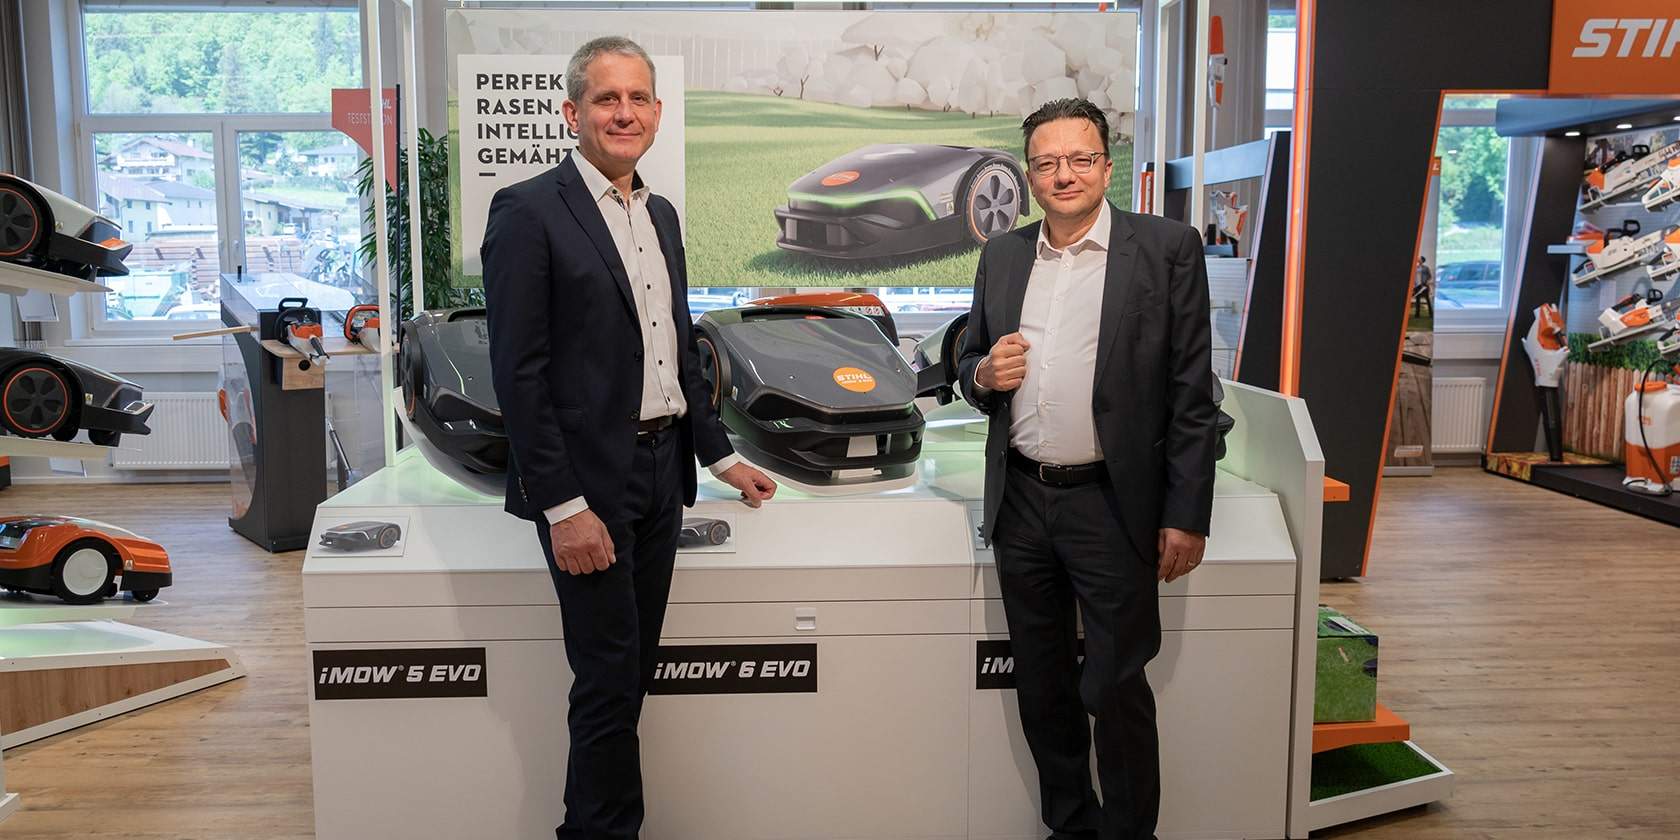 Thilo Foersch (Commercial Manager at STIHL Tirol) and Jan Grigor Schubert (Managing Director of STIHL Tirol) in front of the new generation of iMOW robotic mowers, which were launched in spring 2023.